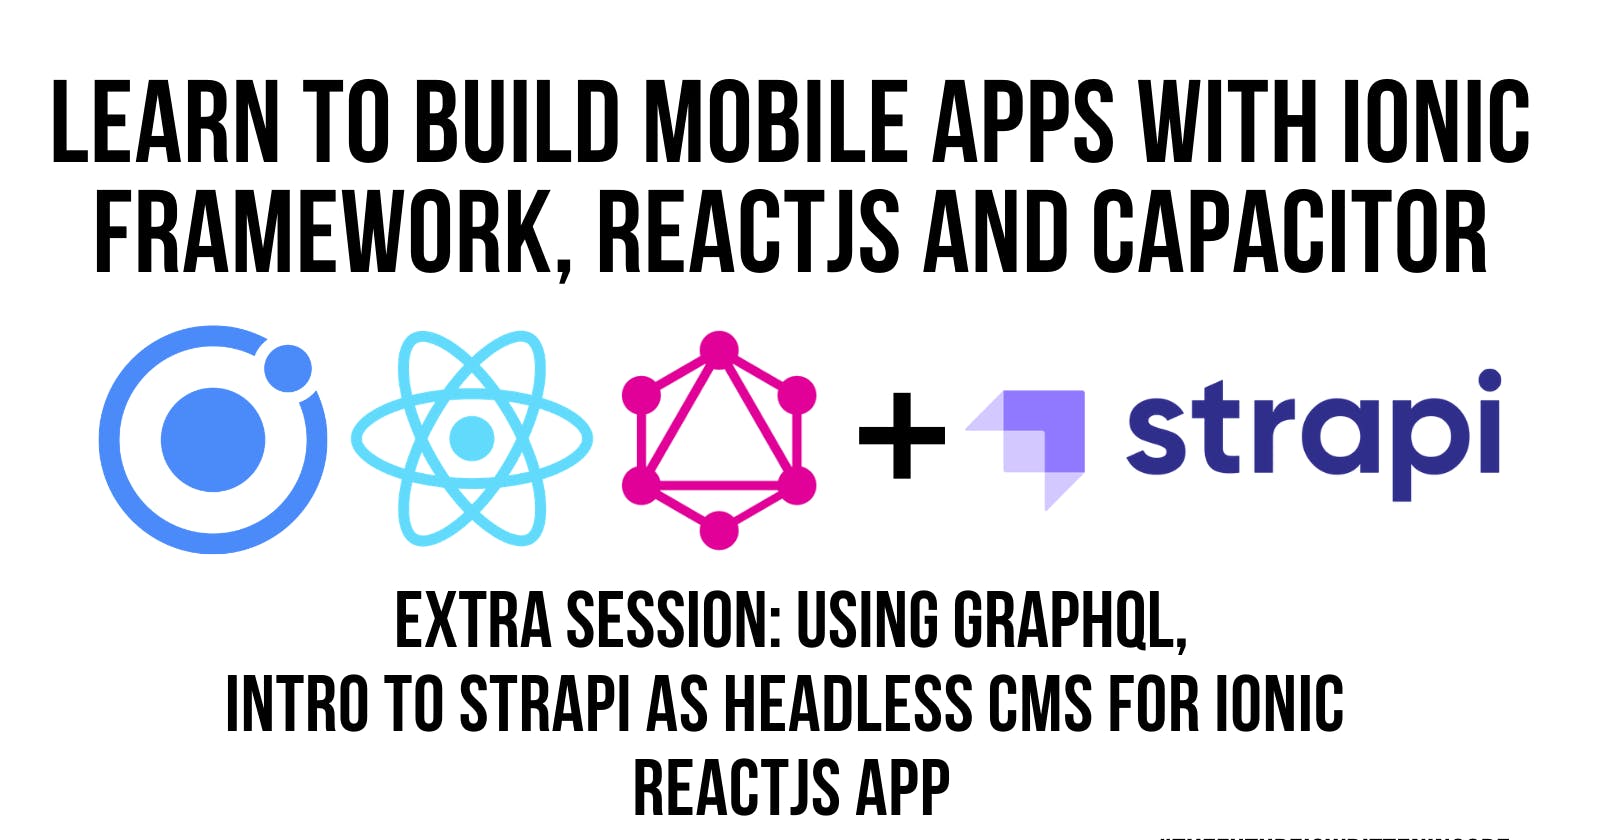 Quick Introduction to Strapi Headless CMS for Ionic ReactJS Mobile App w/GraphQL